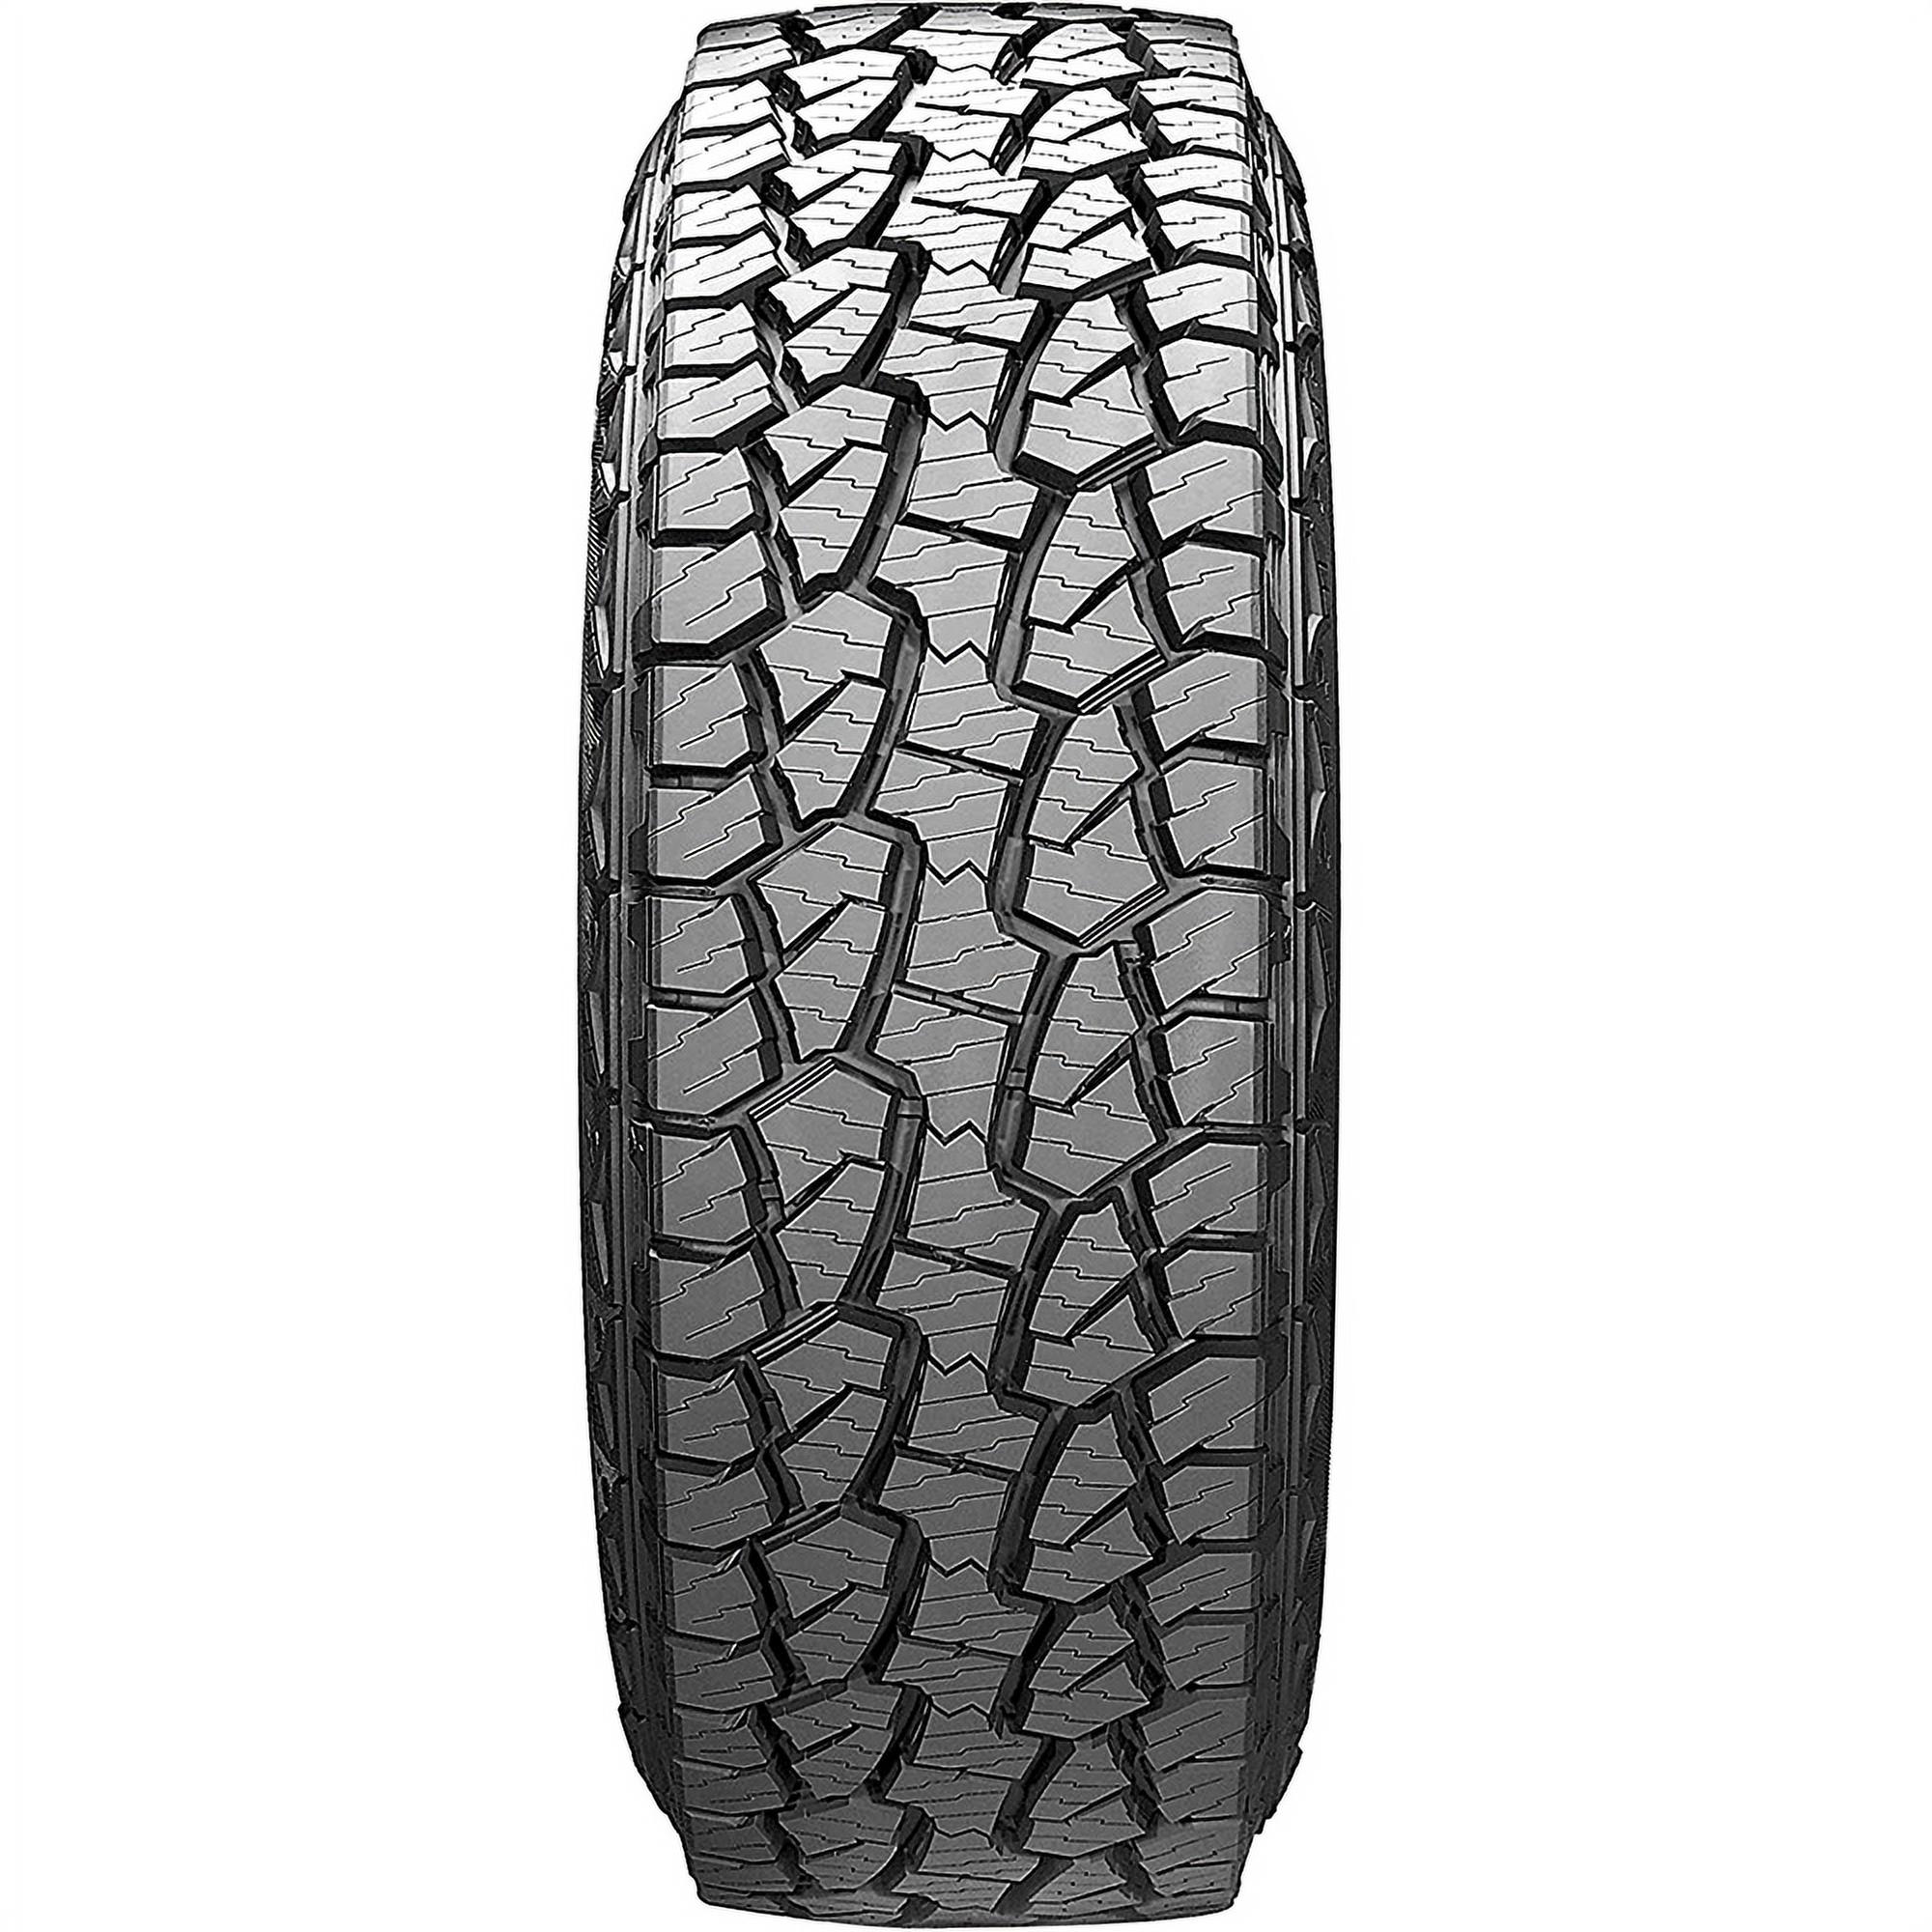 Hankook Dynapro ATM RF10 All-Terrain Tire - LT315/70R17 LRD 8PLY Rated - image 3 of 3